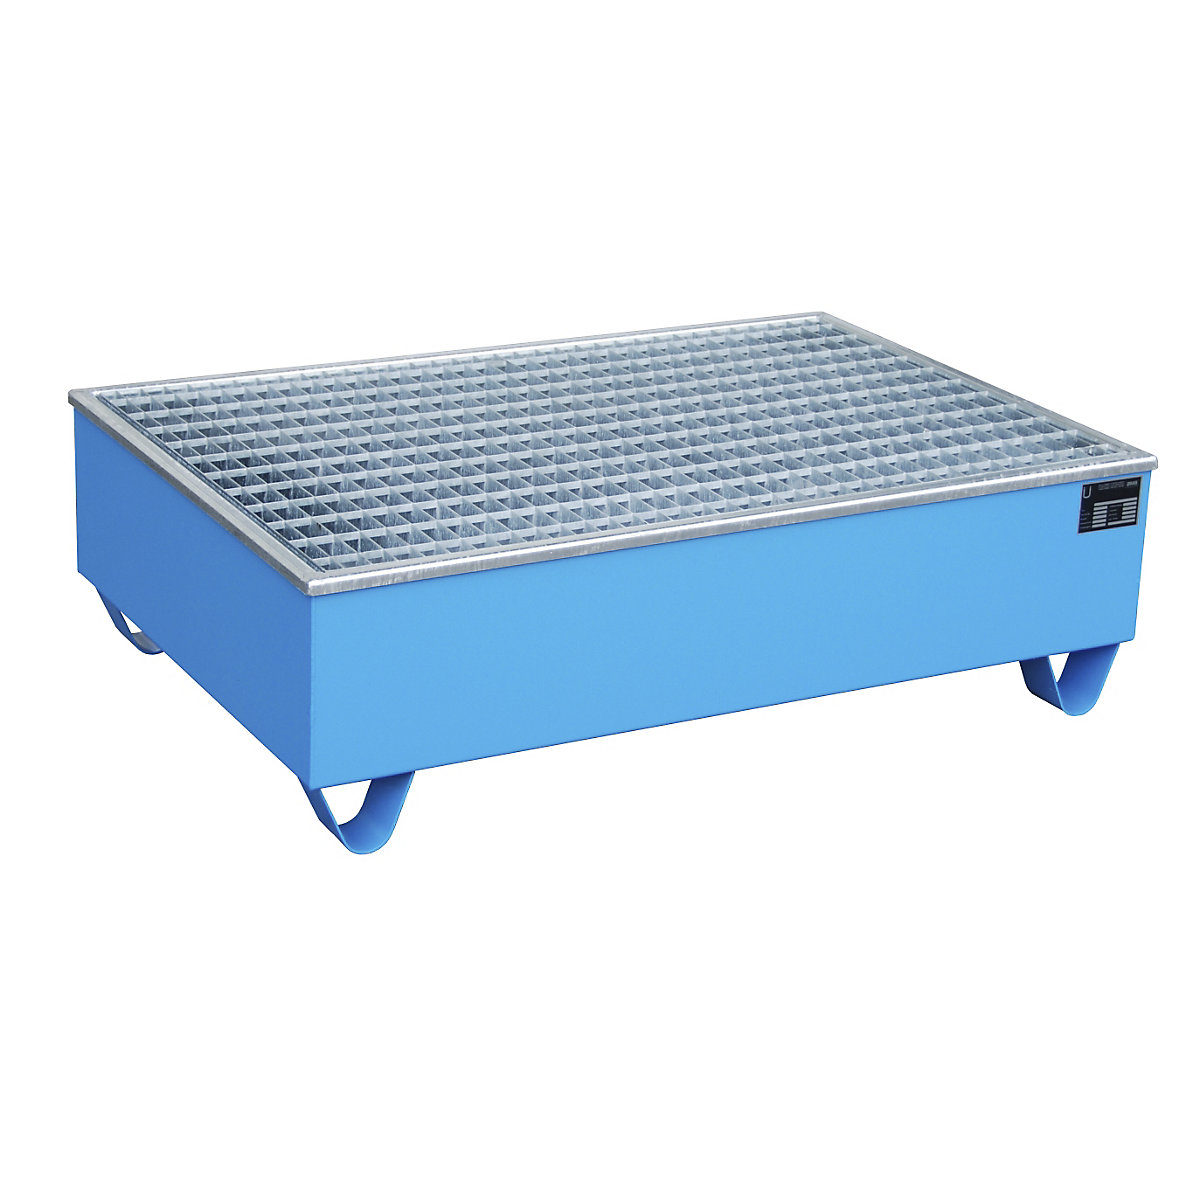 Steel sump tray with PE insert – eurokraft pro, capacity 200 litres, LxWxH 1212 x 812 x 363 mm, painted blue-8